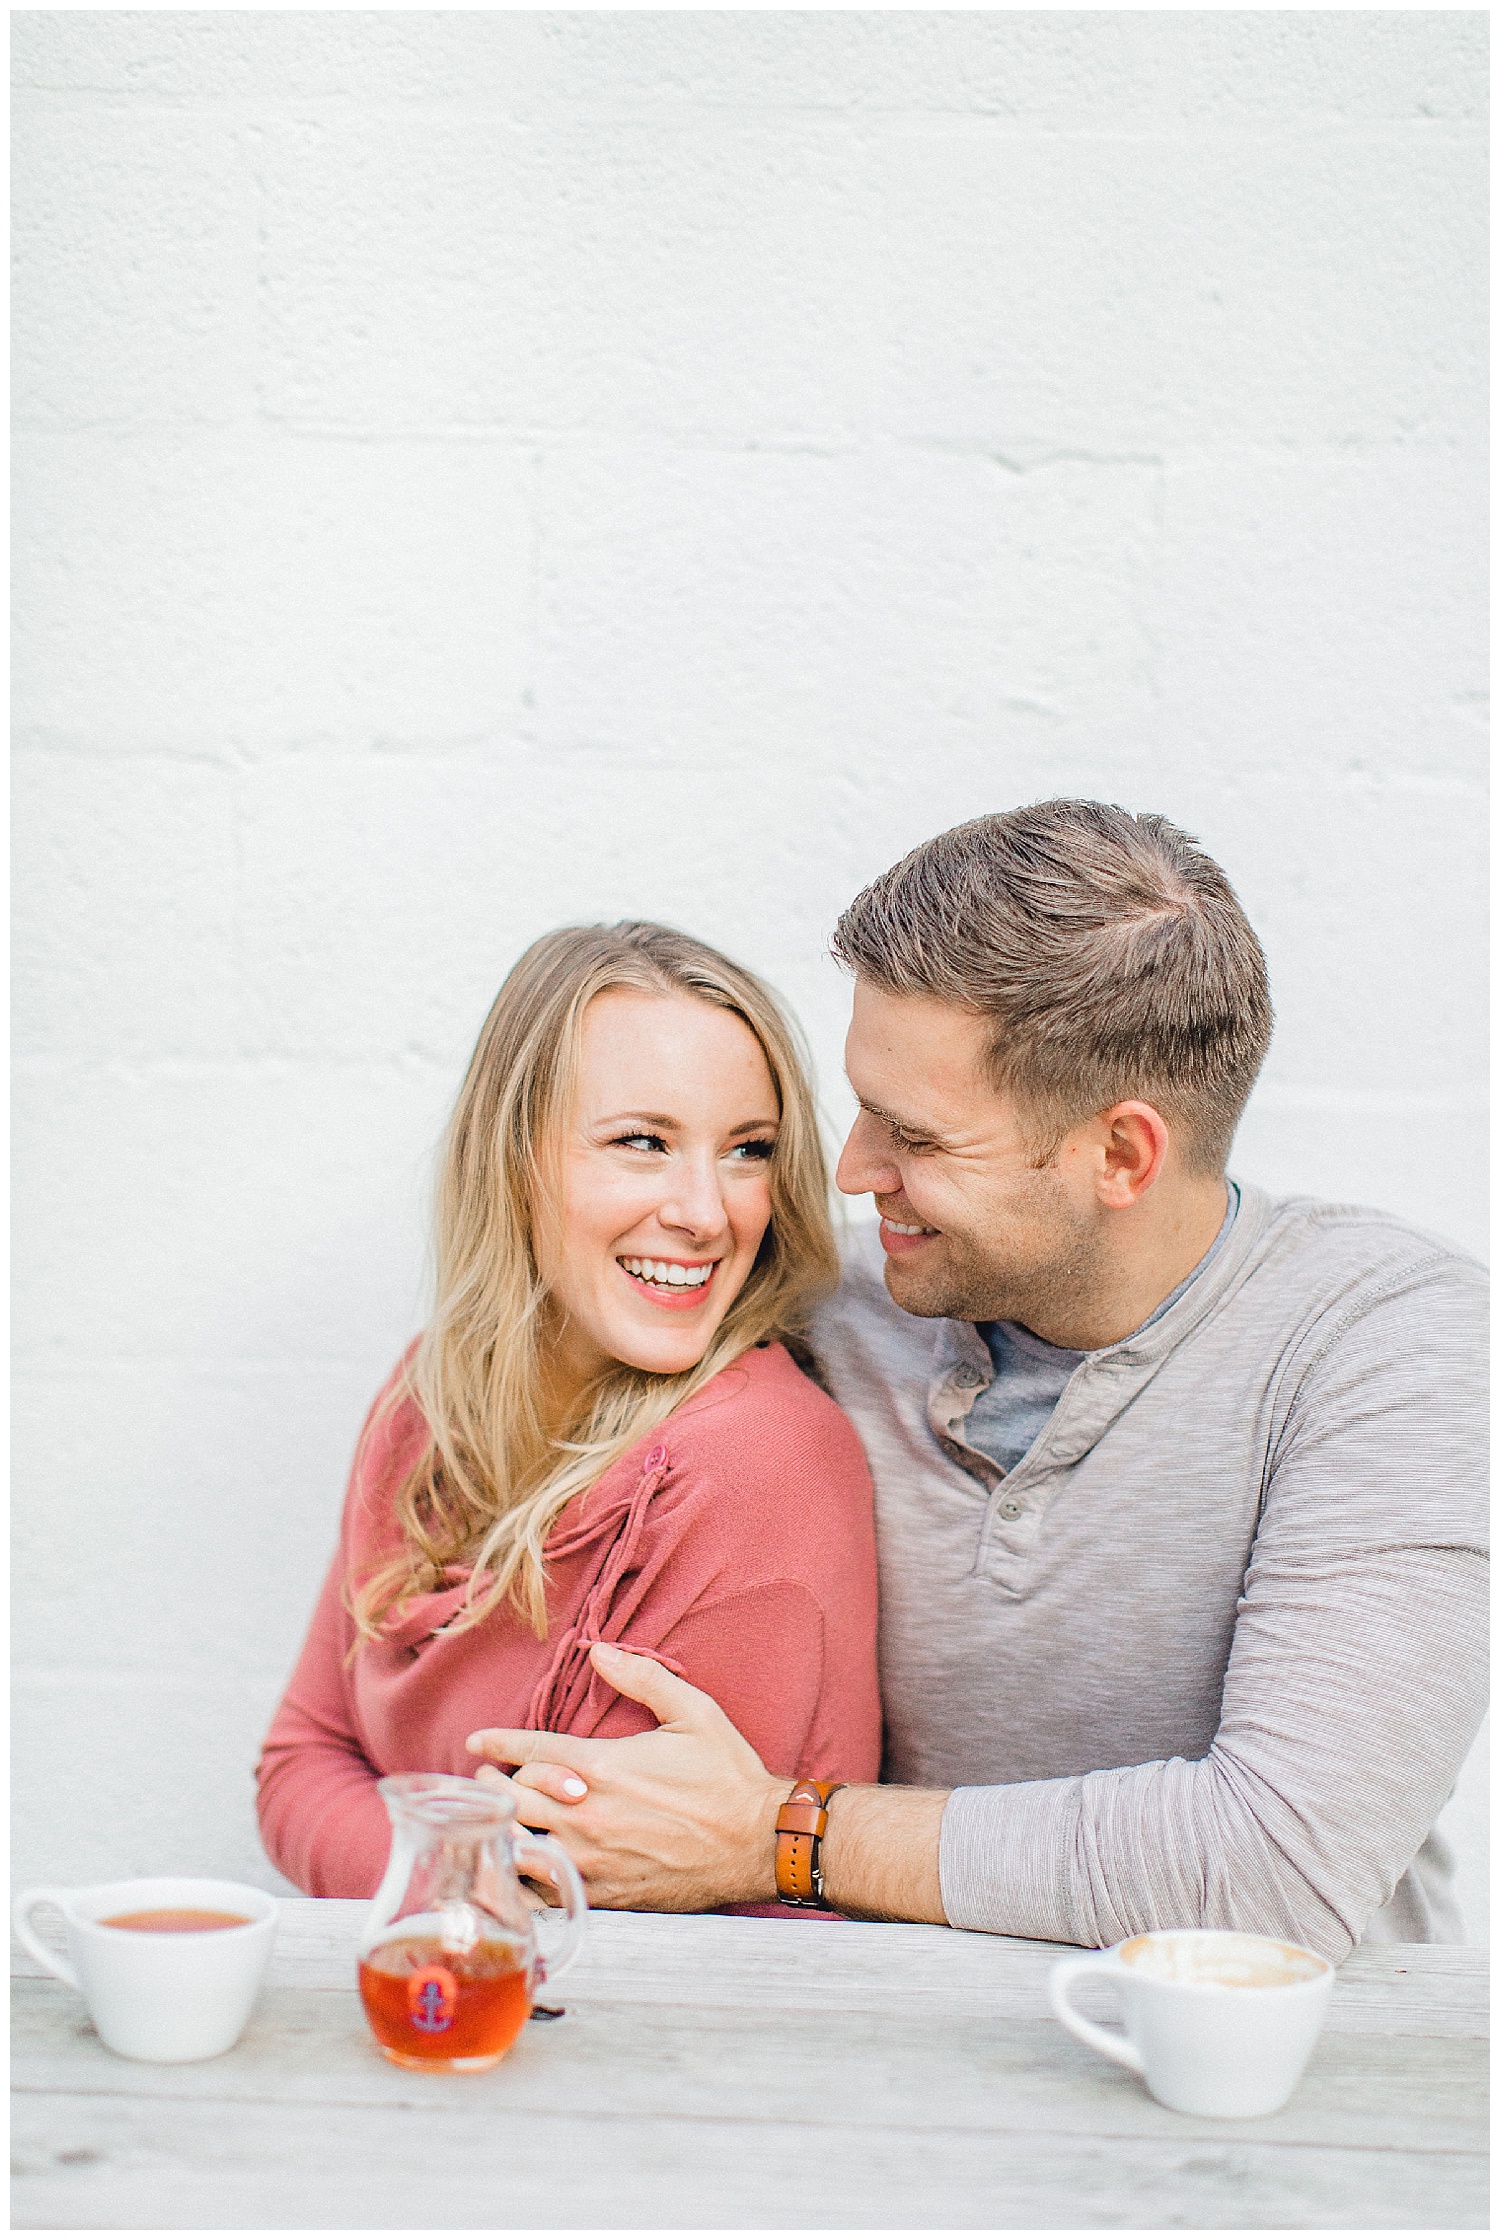 ERC_0990_Downtown Nashville Engagement Session at Barista Parlor | Emma Rose Company Wedding Photographer | Outfit Inspiration for Engagement Session | Kindred Light and Airy Photographer.jpg